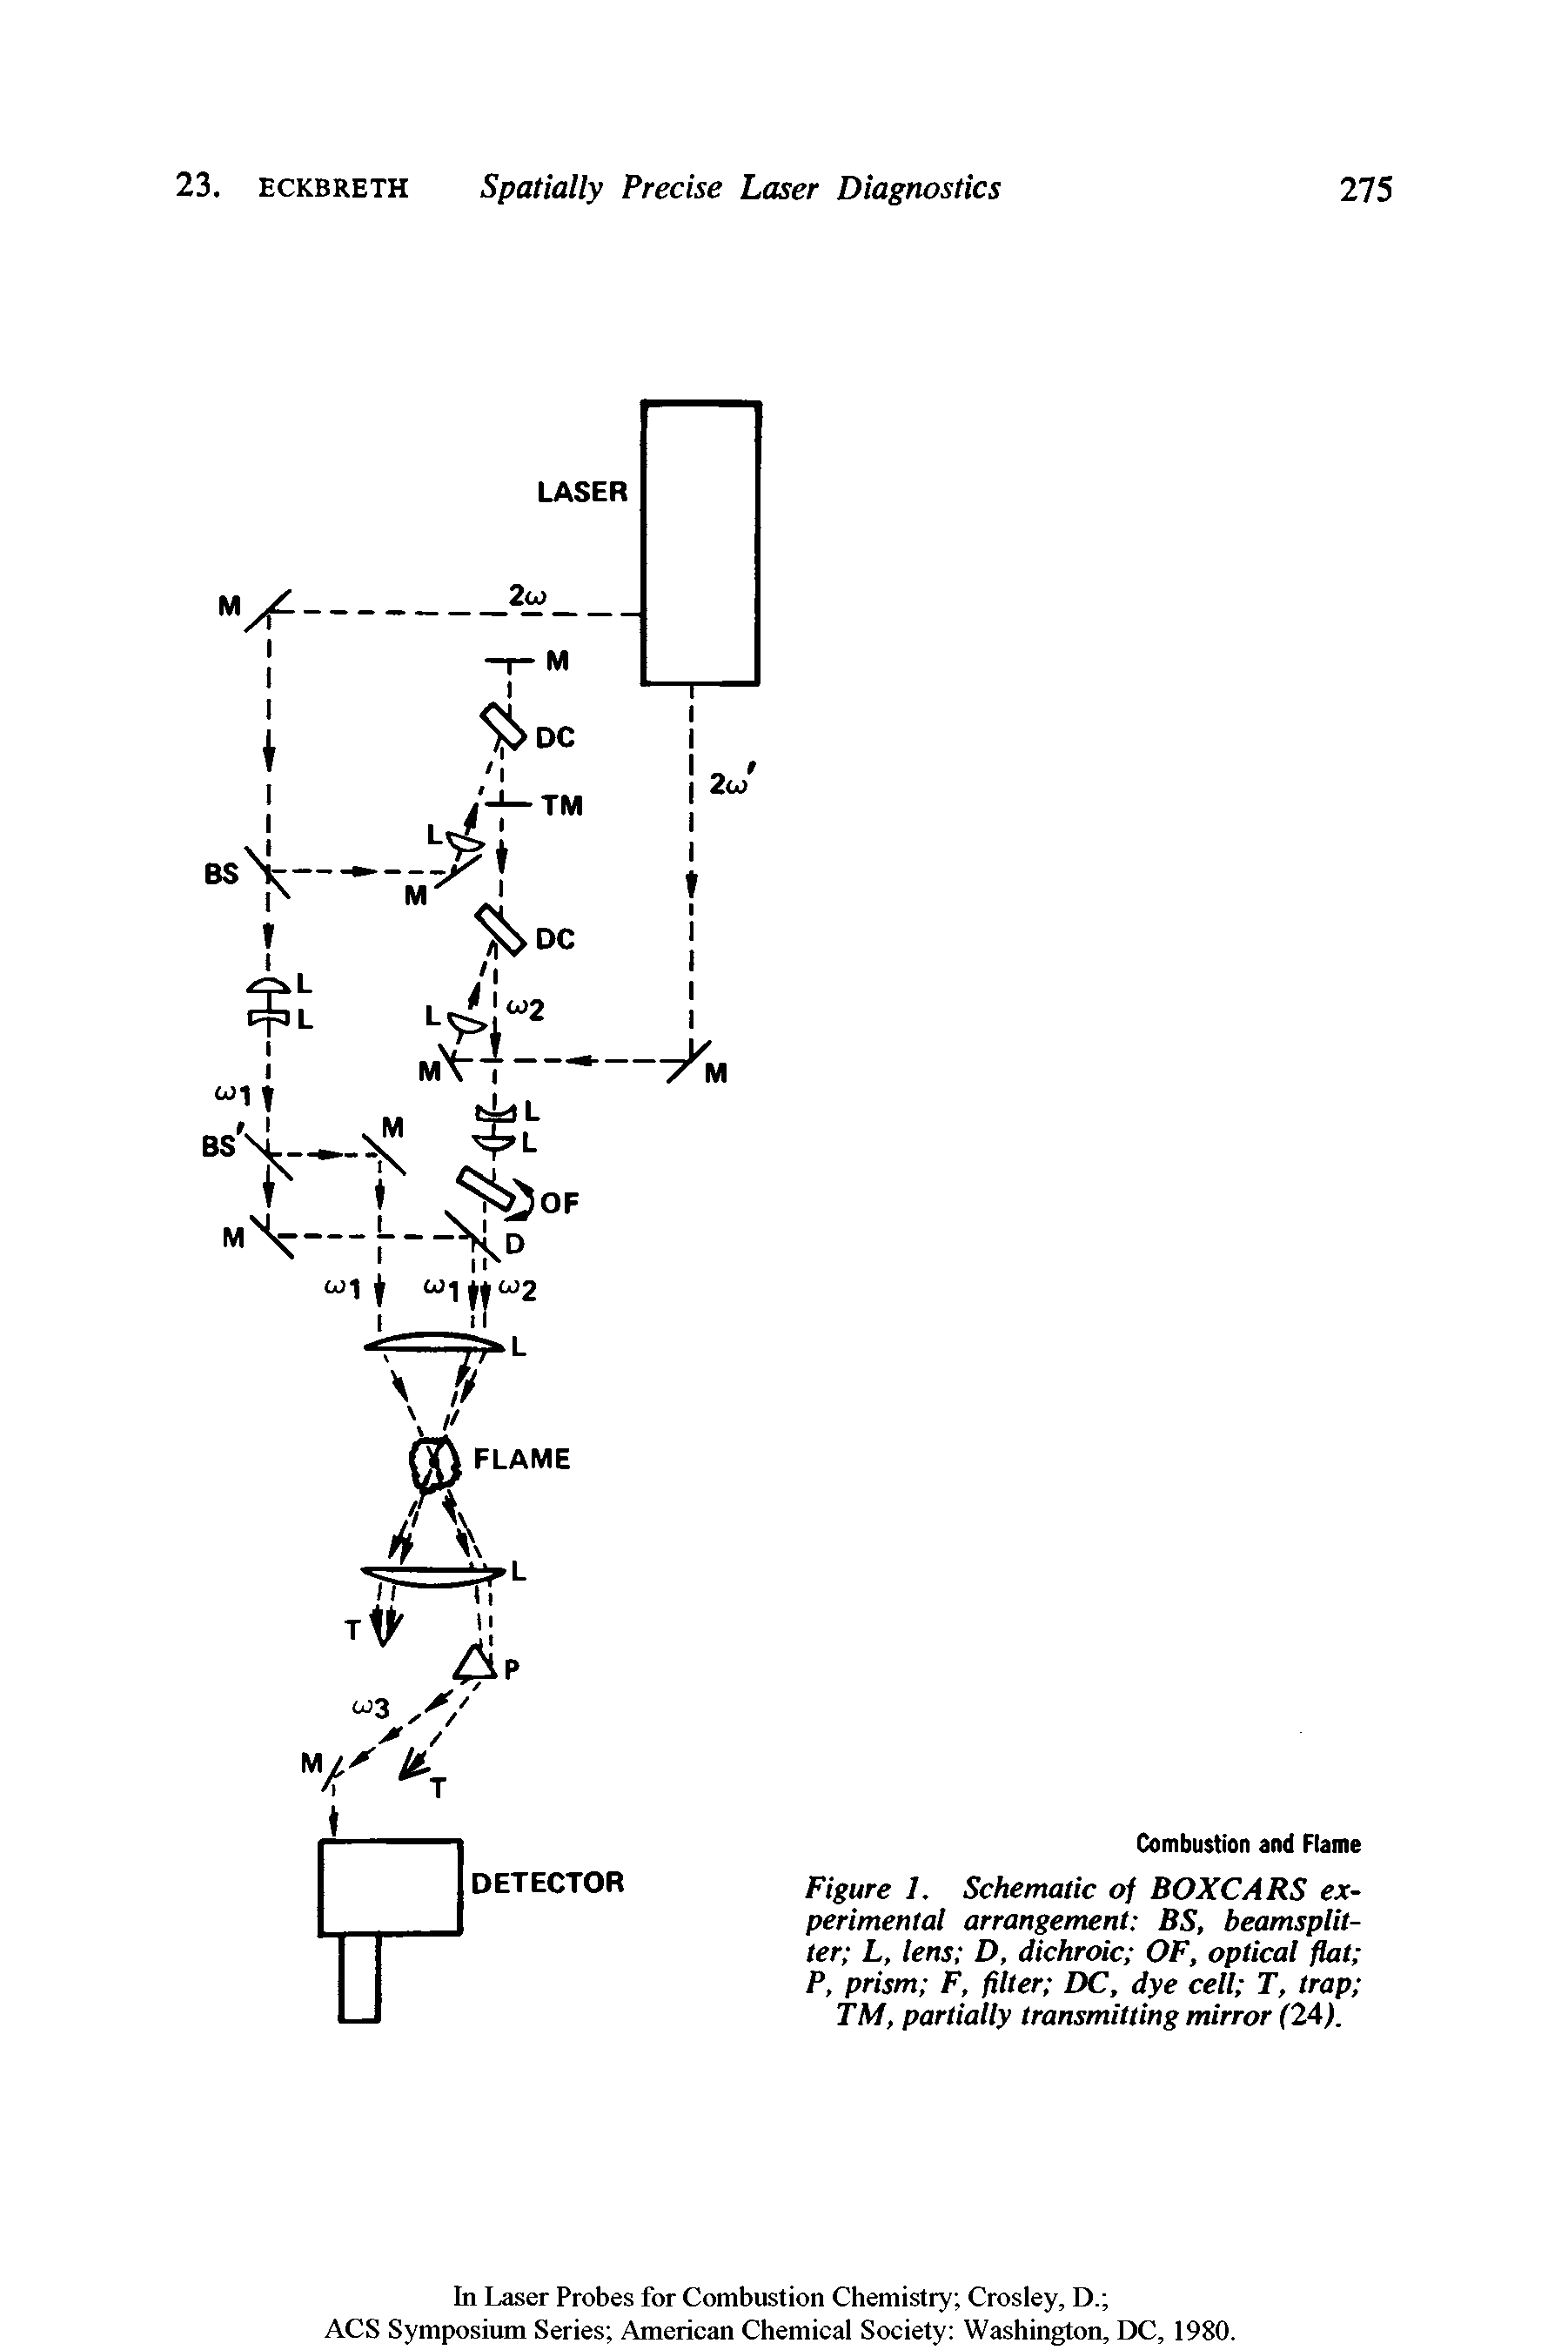 Figure 1. Schematic of BOXCARS experimental arrangement BS, beamsplitter L, lens D, dichroic OF, optical flat P, prism F, filter DC, dye cell T, trap TM, partially transmitting mirror (24).